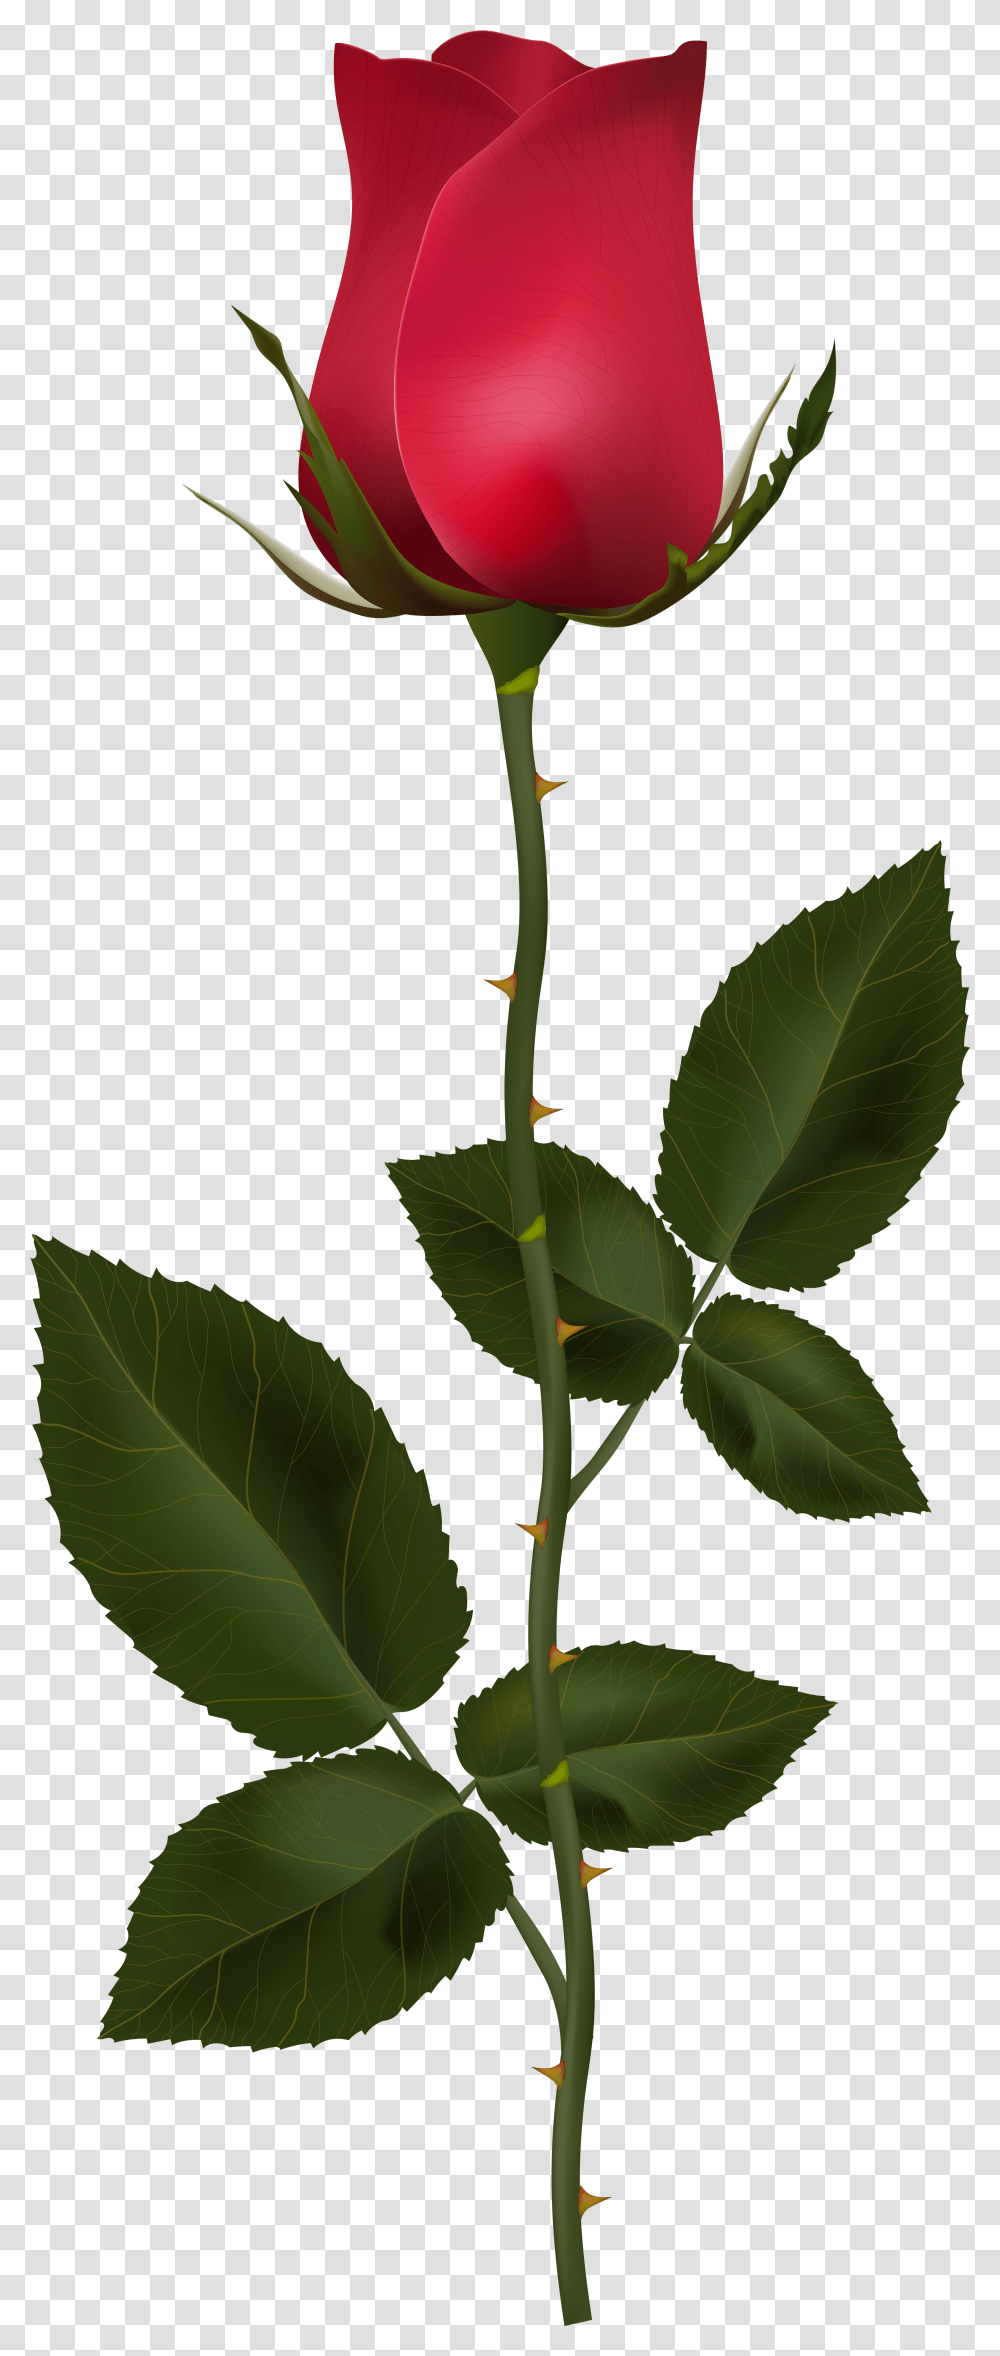 Red Rose With Stem Clip Art Image Gallery Yopriceville High Quality Rose With Stem, Leaf, Plant, Flower, Blossom Transparent Png